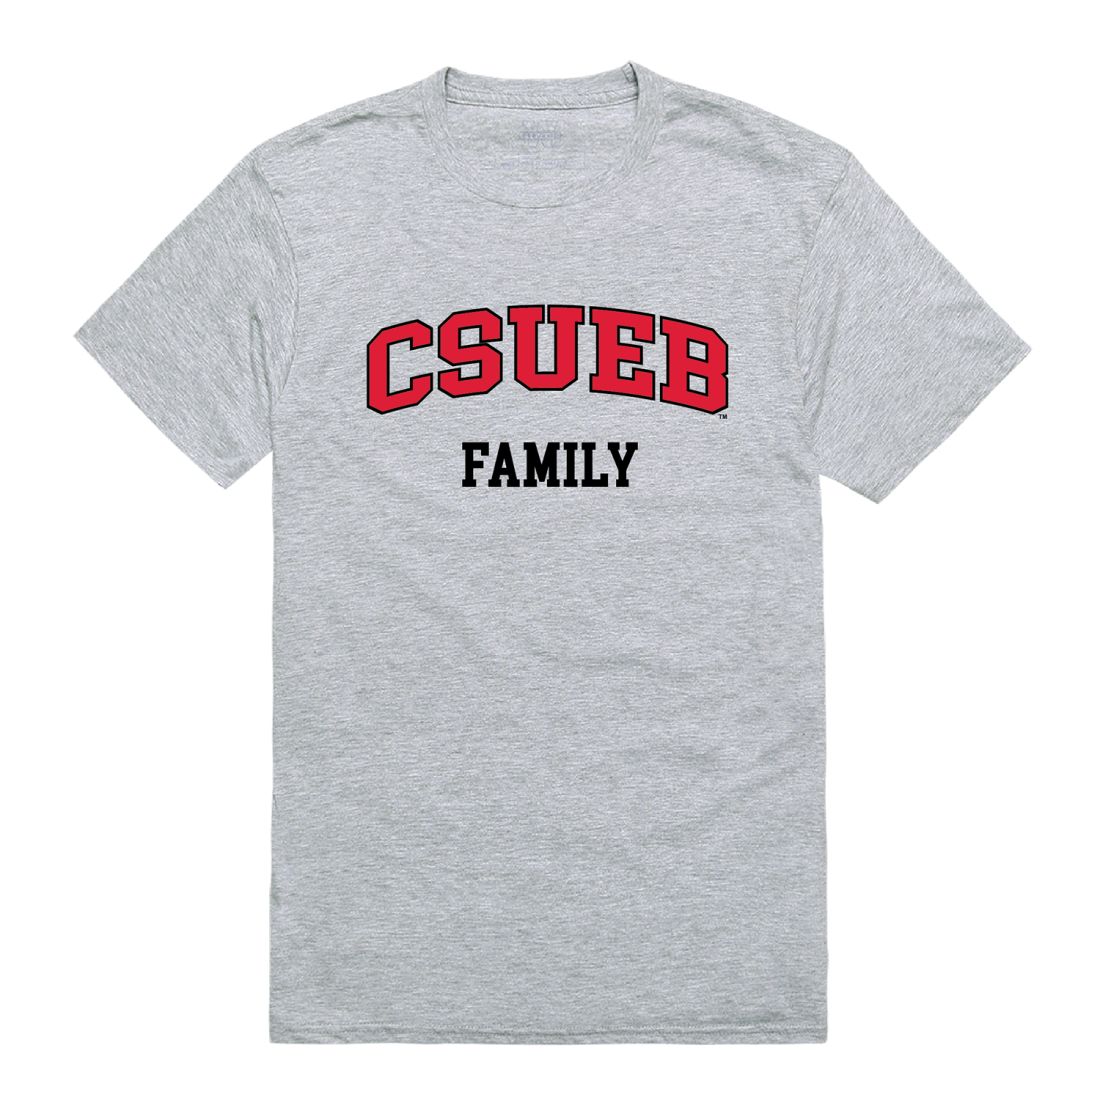 California State University East Bay Pioneers Family T-Shirt